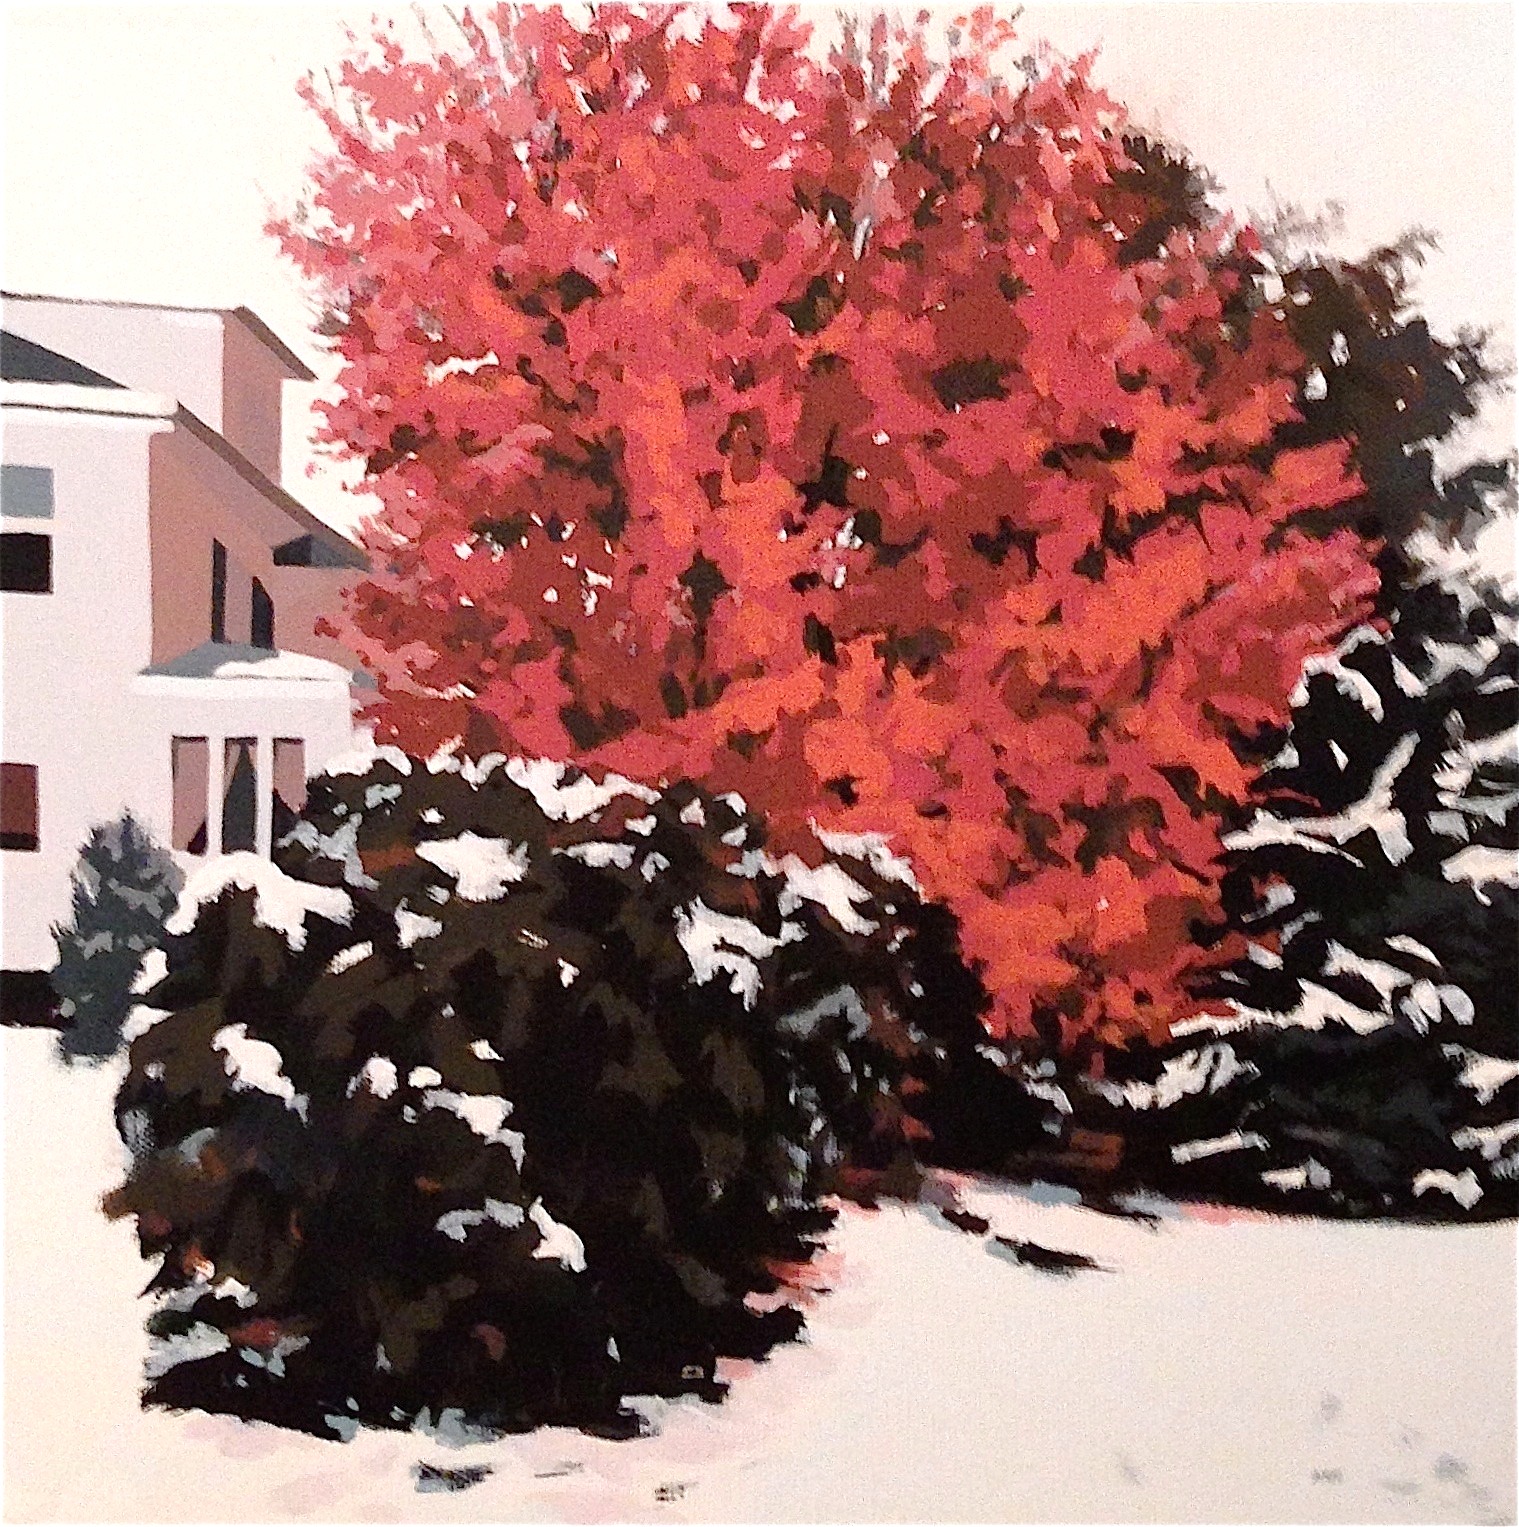 "Red Maple in Winter"